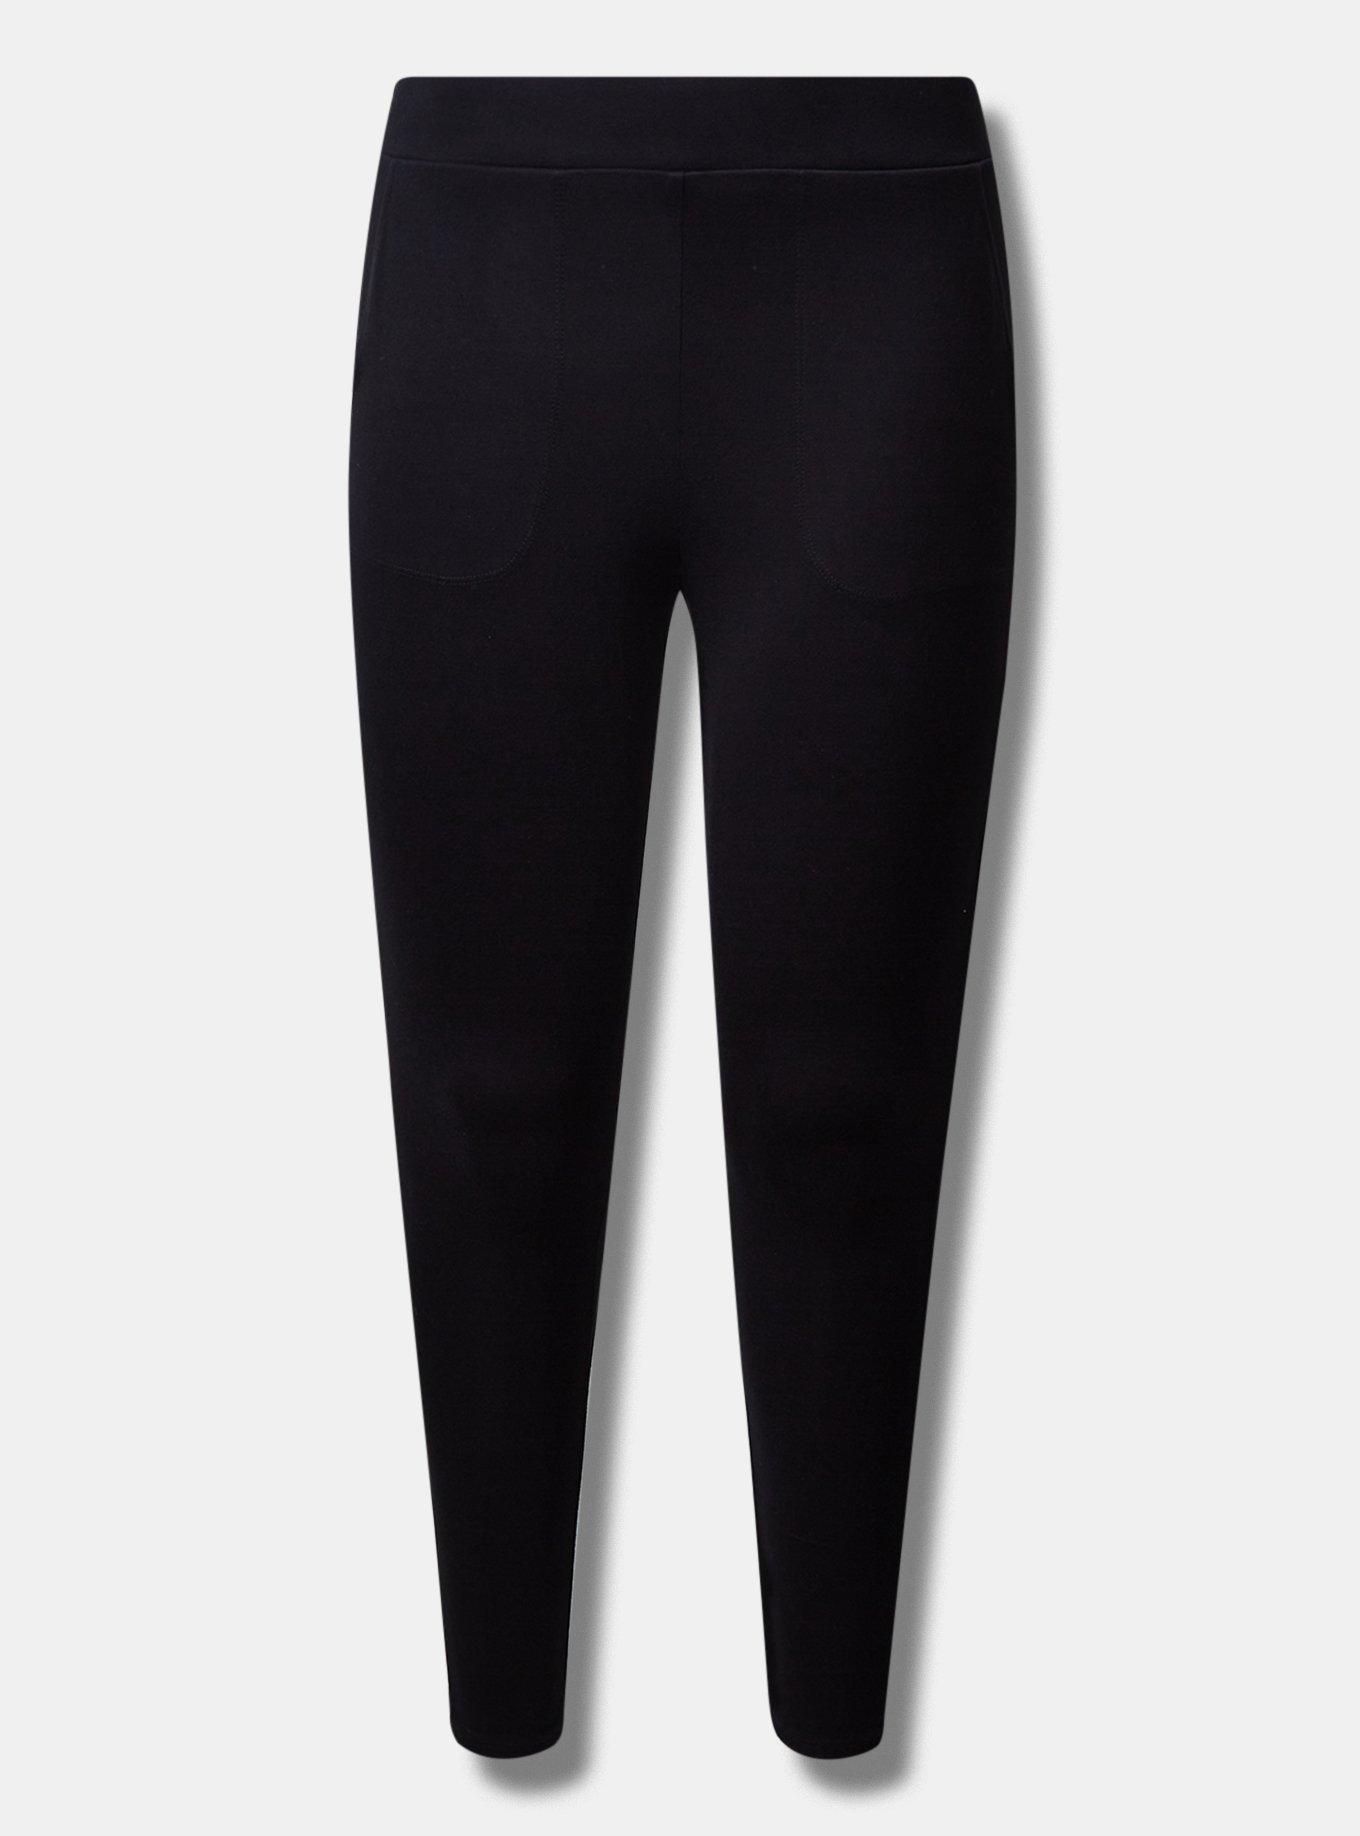 Soft Leggings For Women - High Waisted Tummy Control No See Through Workout  Yoga Pants for Sale New Zealand, New Collection Online